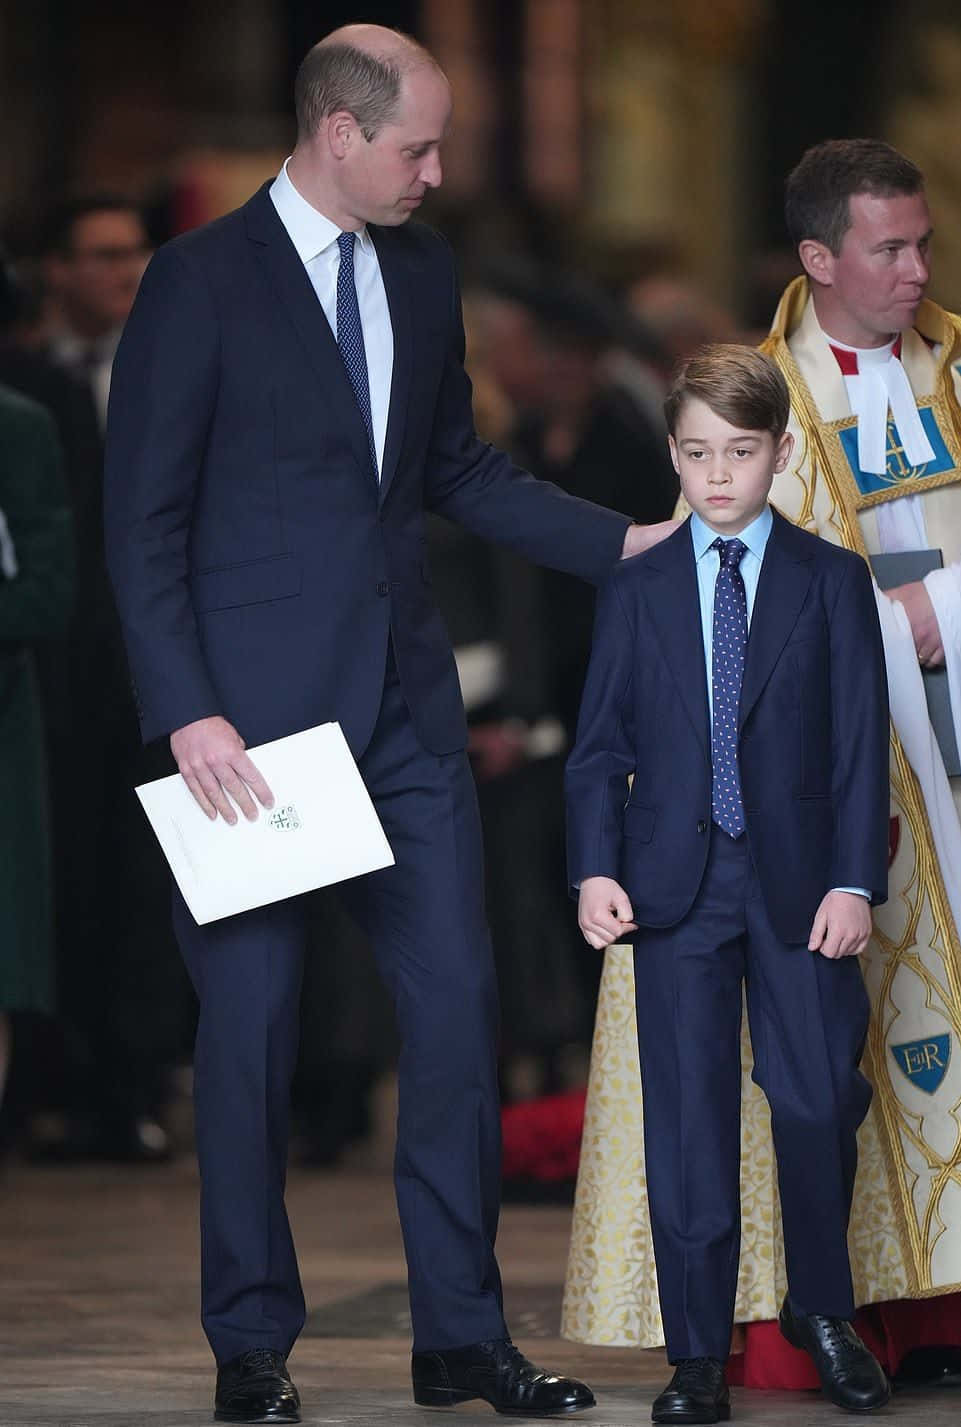 Prince William And His Son Walk Down The Aisle